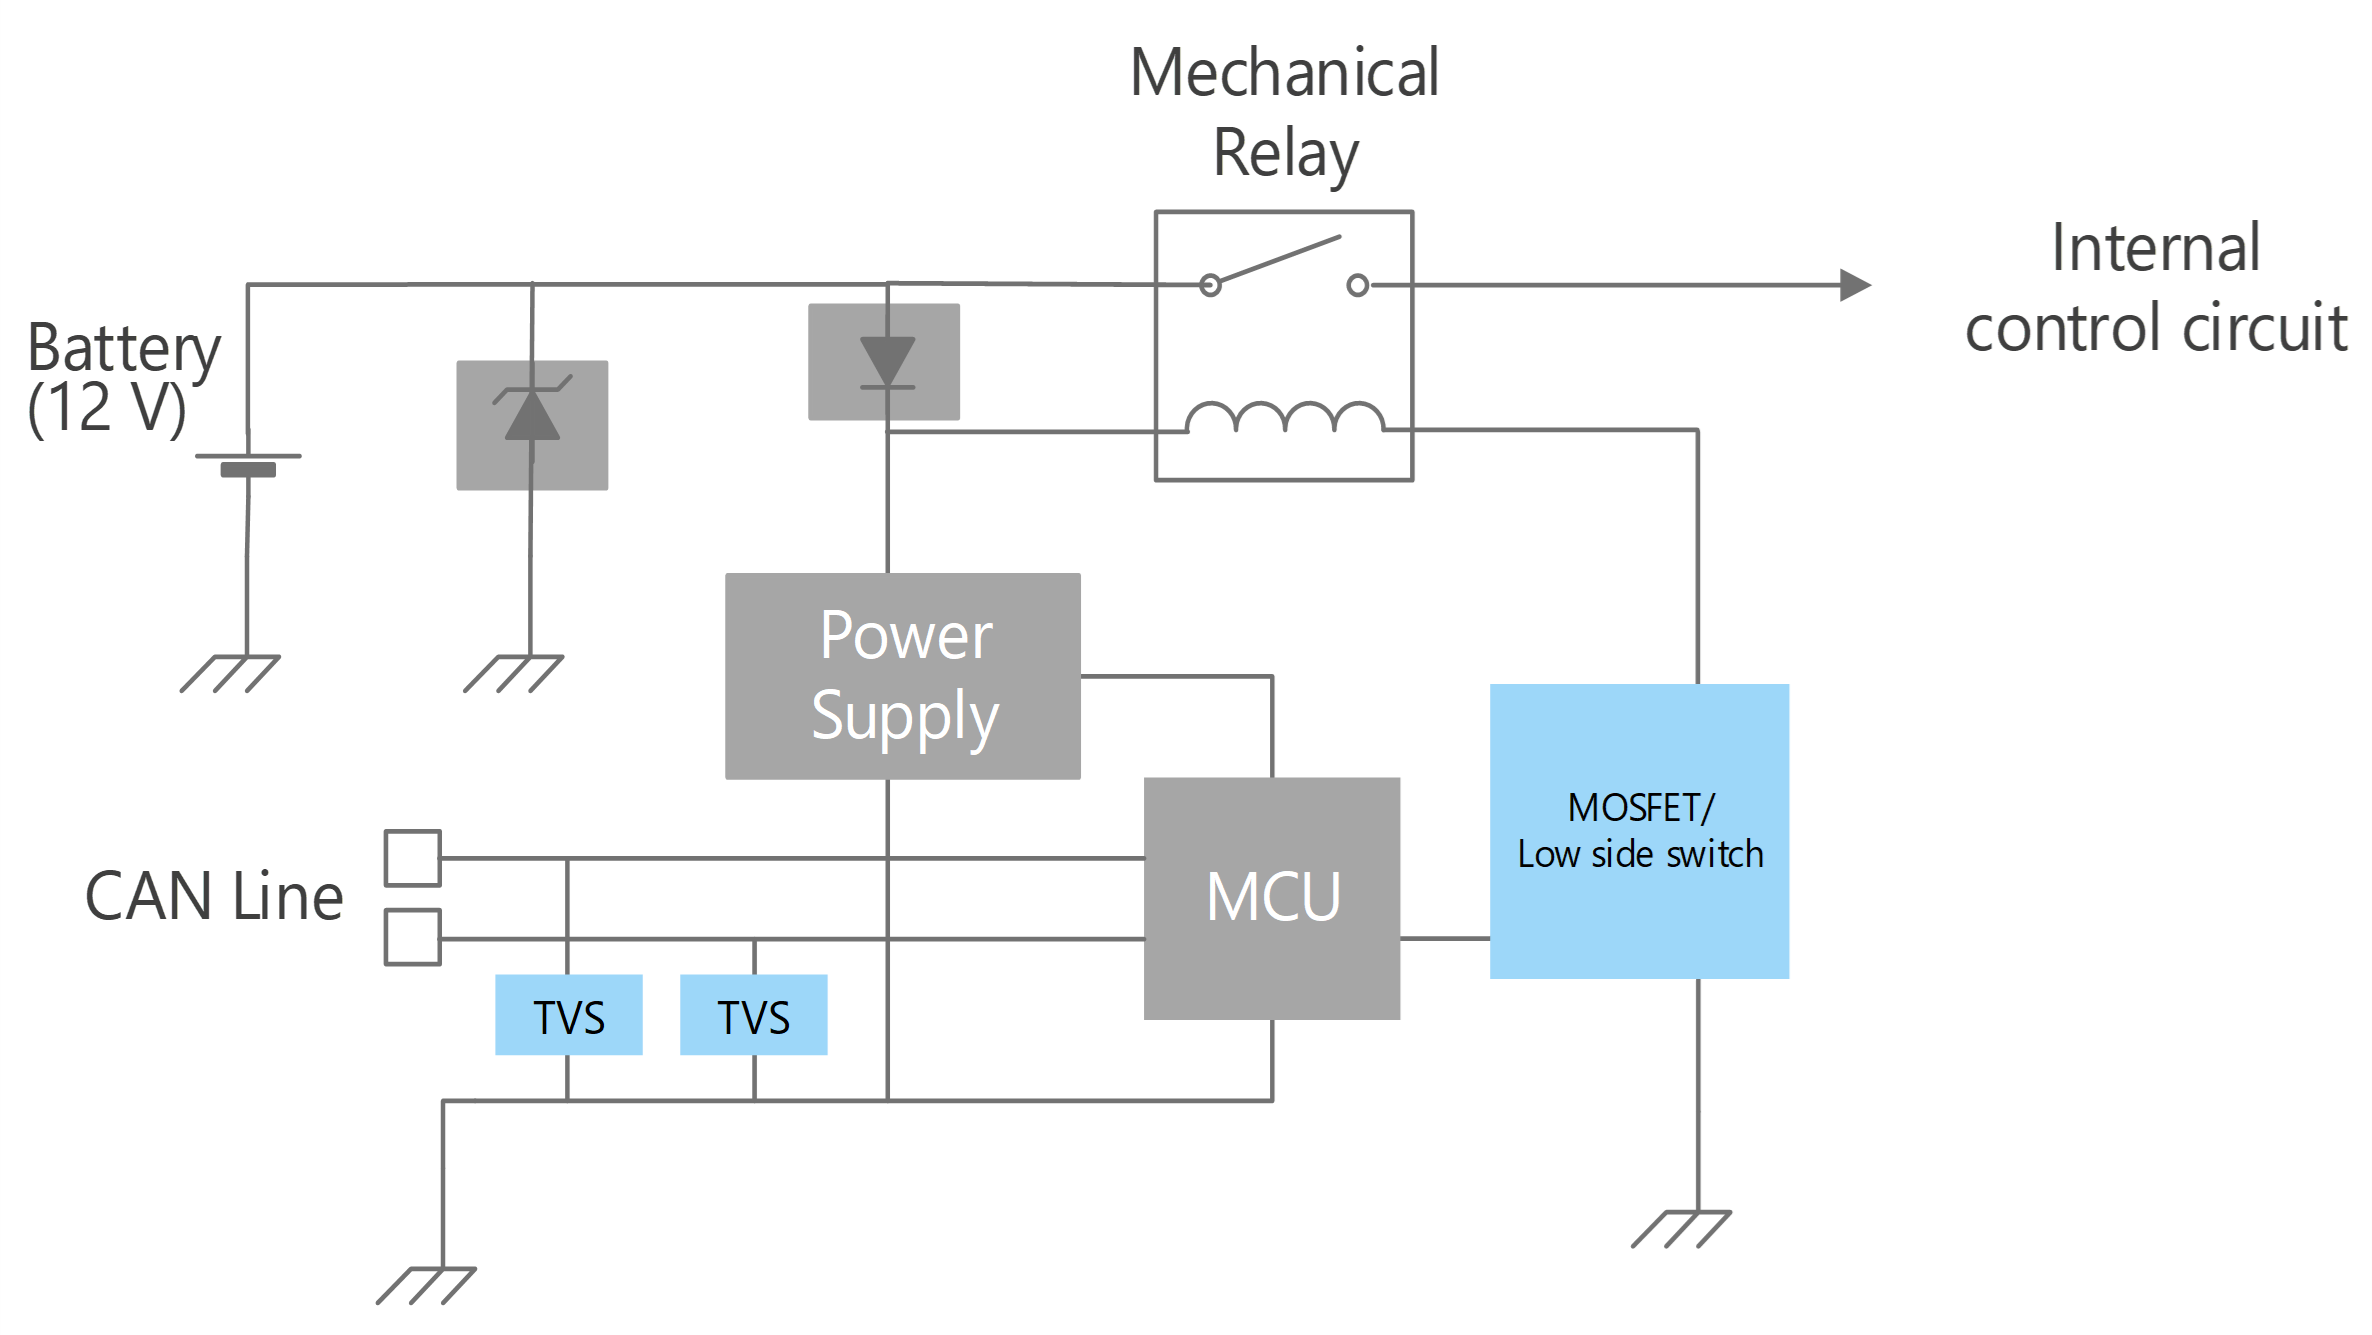 Mechanical relay system